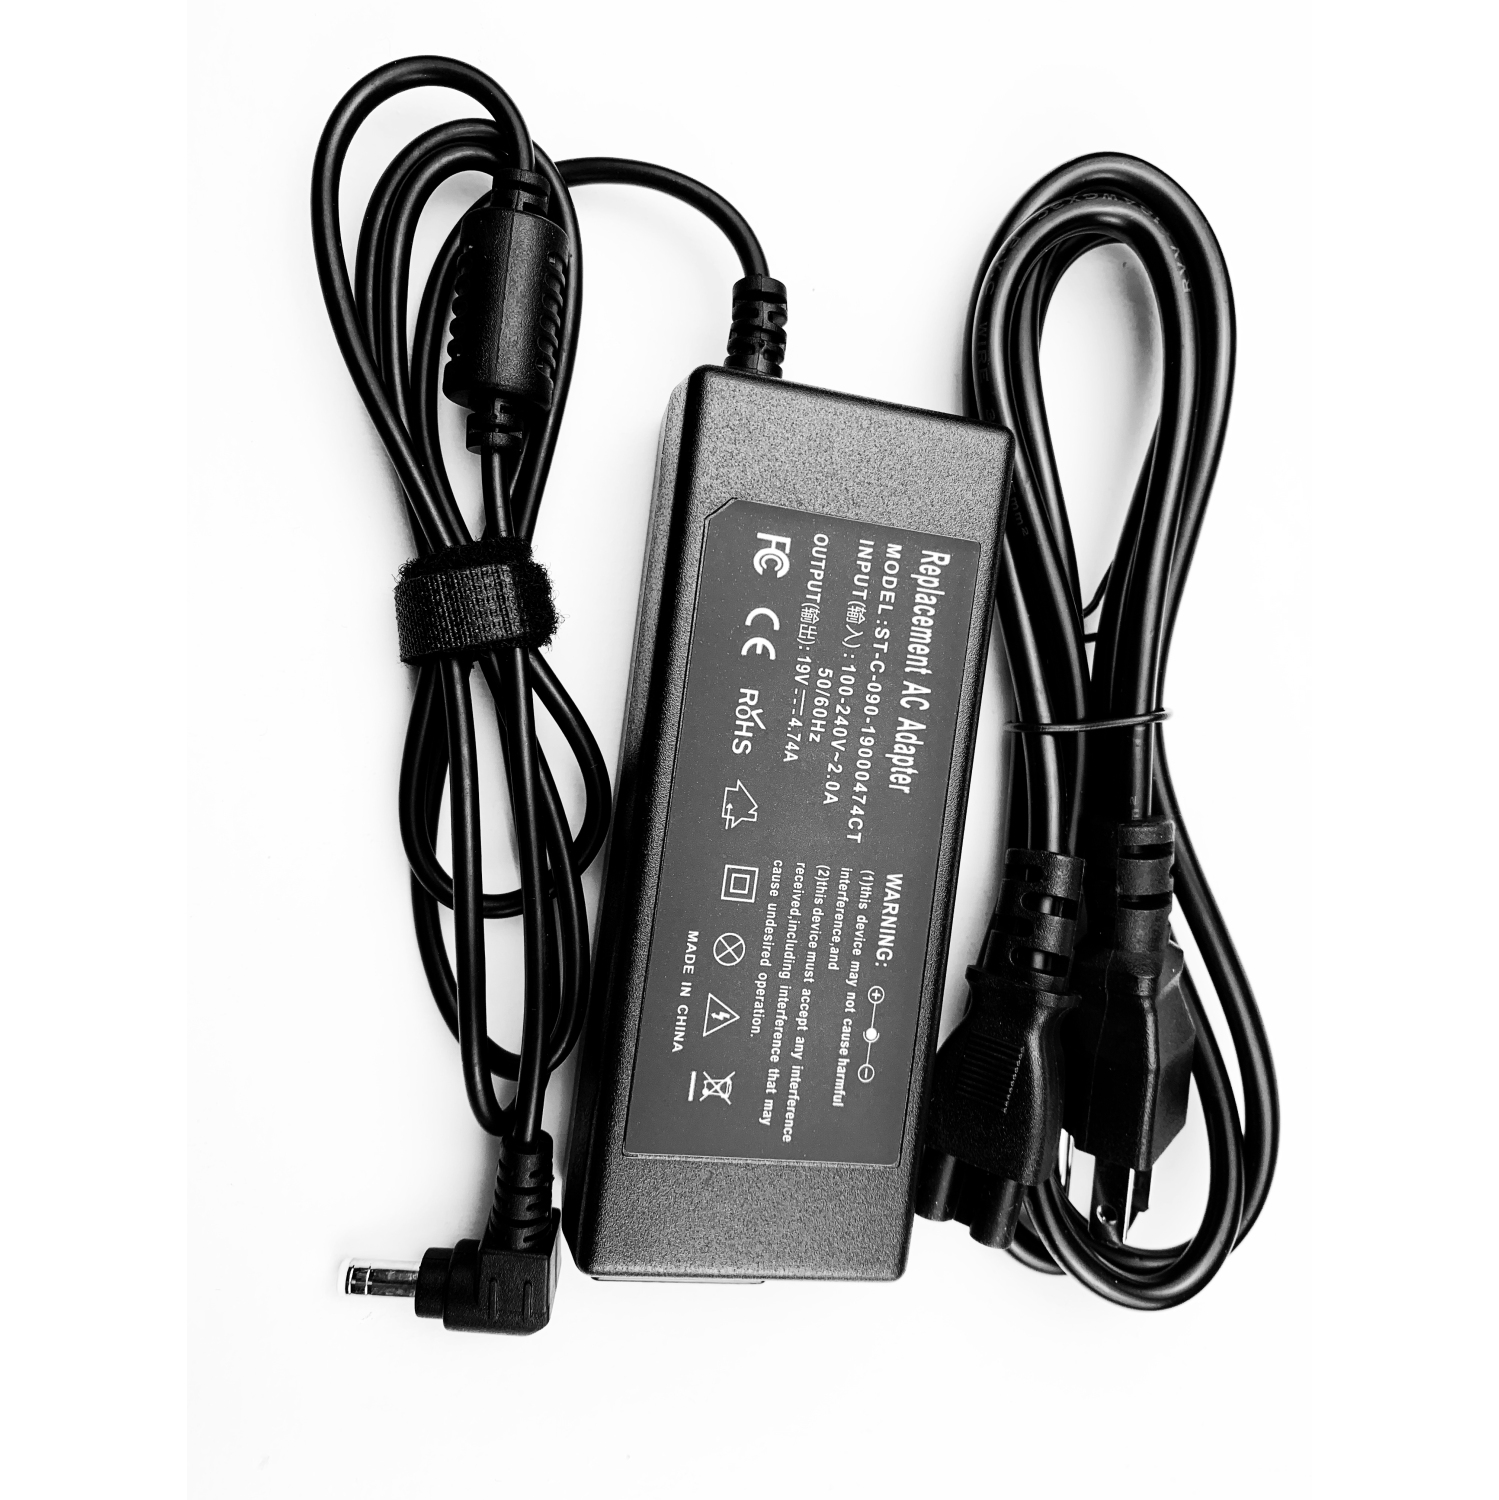 90W AC adapter power cord charger for Toshiba Satellite Pro P300-18Q U400-126 P845 P845D